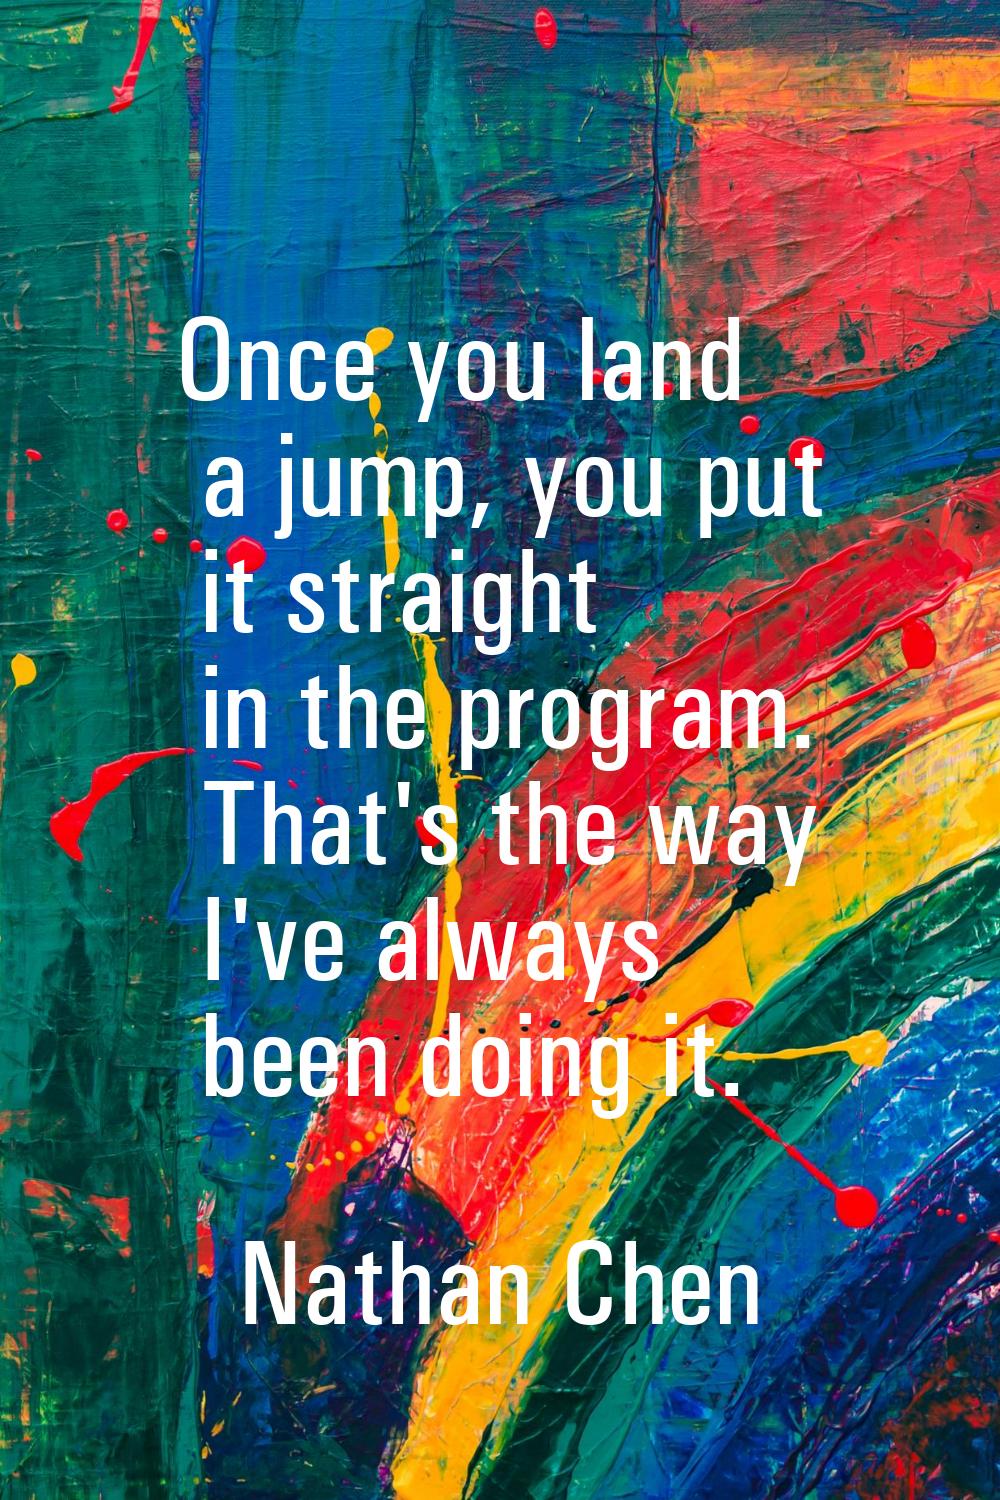 Once you land a jump, you put it straight in the program. That's the way I've always been doing it.